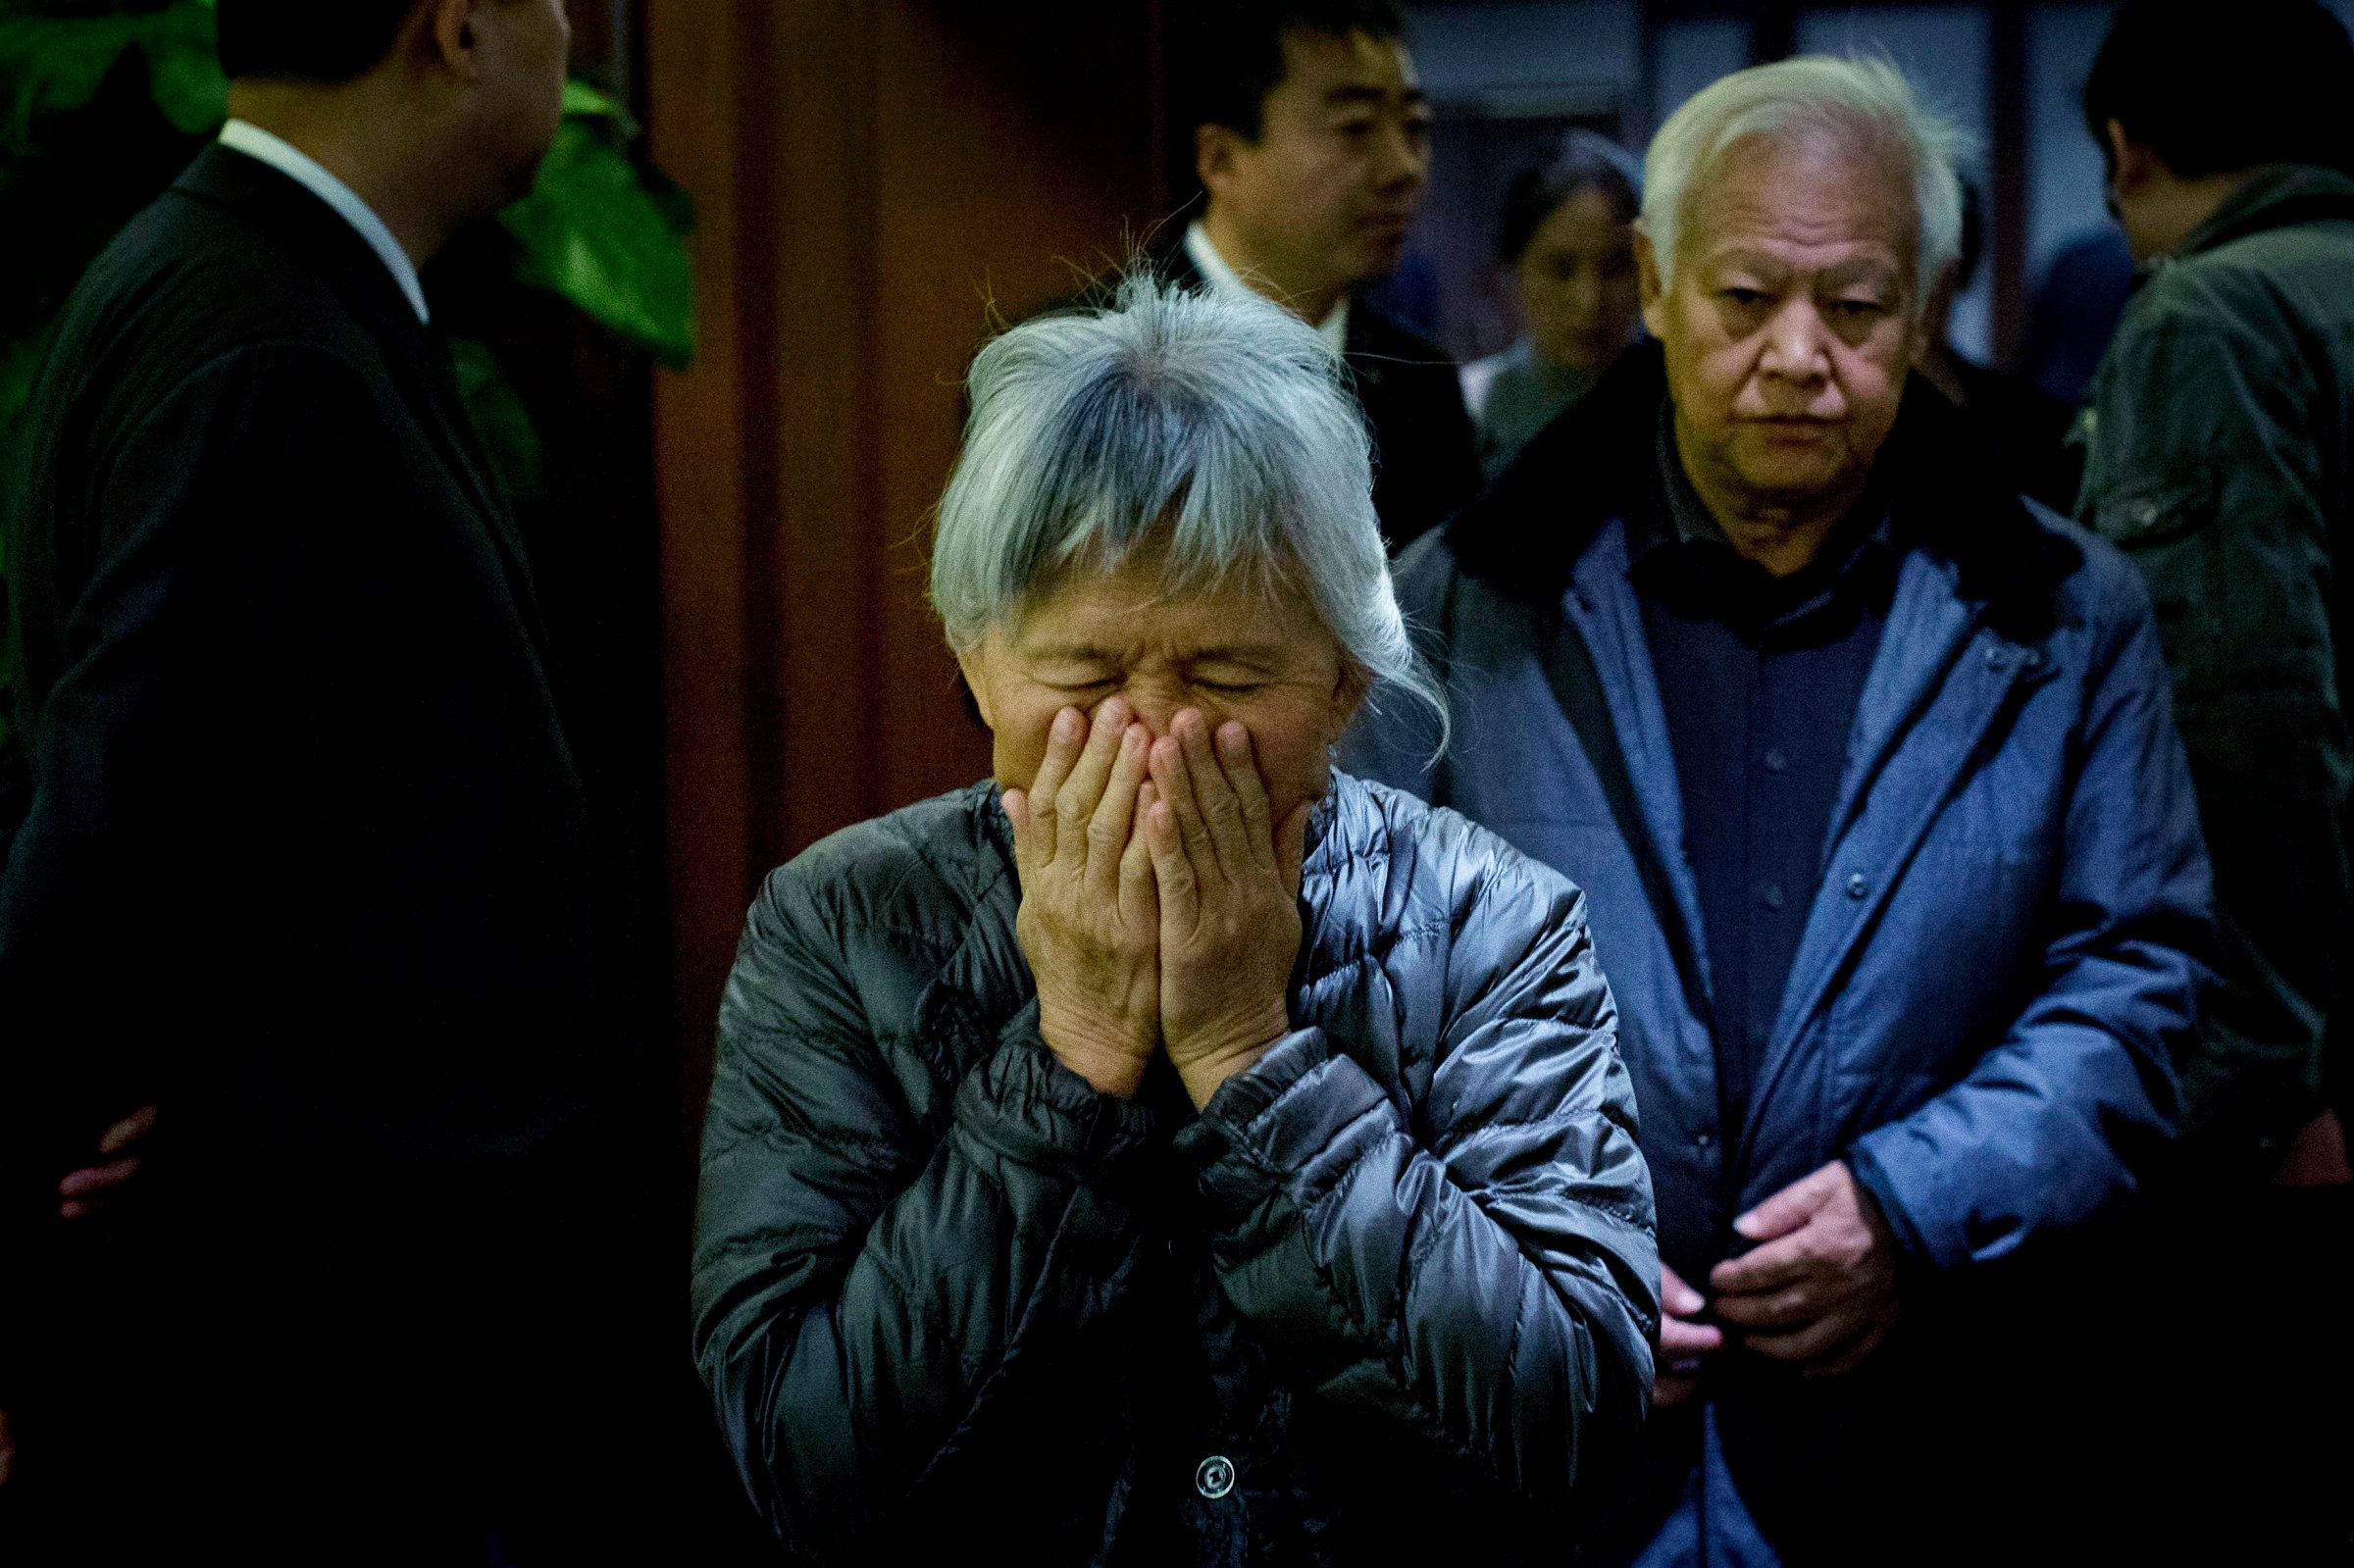 An elderly woman, one of the relatives of Chinese passengers aboard missing Malaysia Airlines Flight MH370, covers her face out of frustration as she leaves a hotel ballroom after a daily briefing meeting with managers of Malaysia Airlines in Beijing, on March 19, 2014.